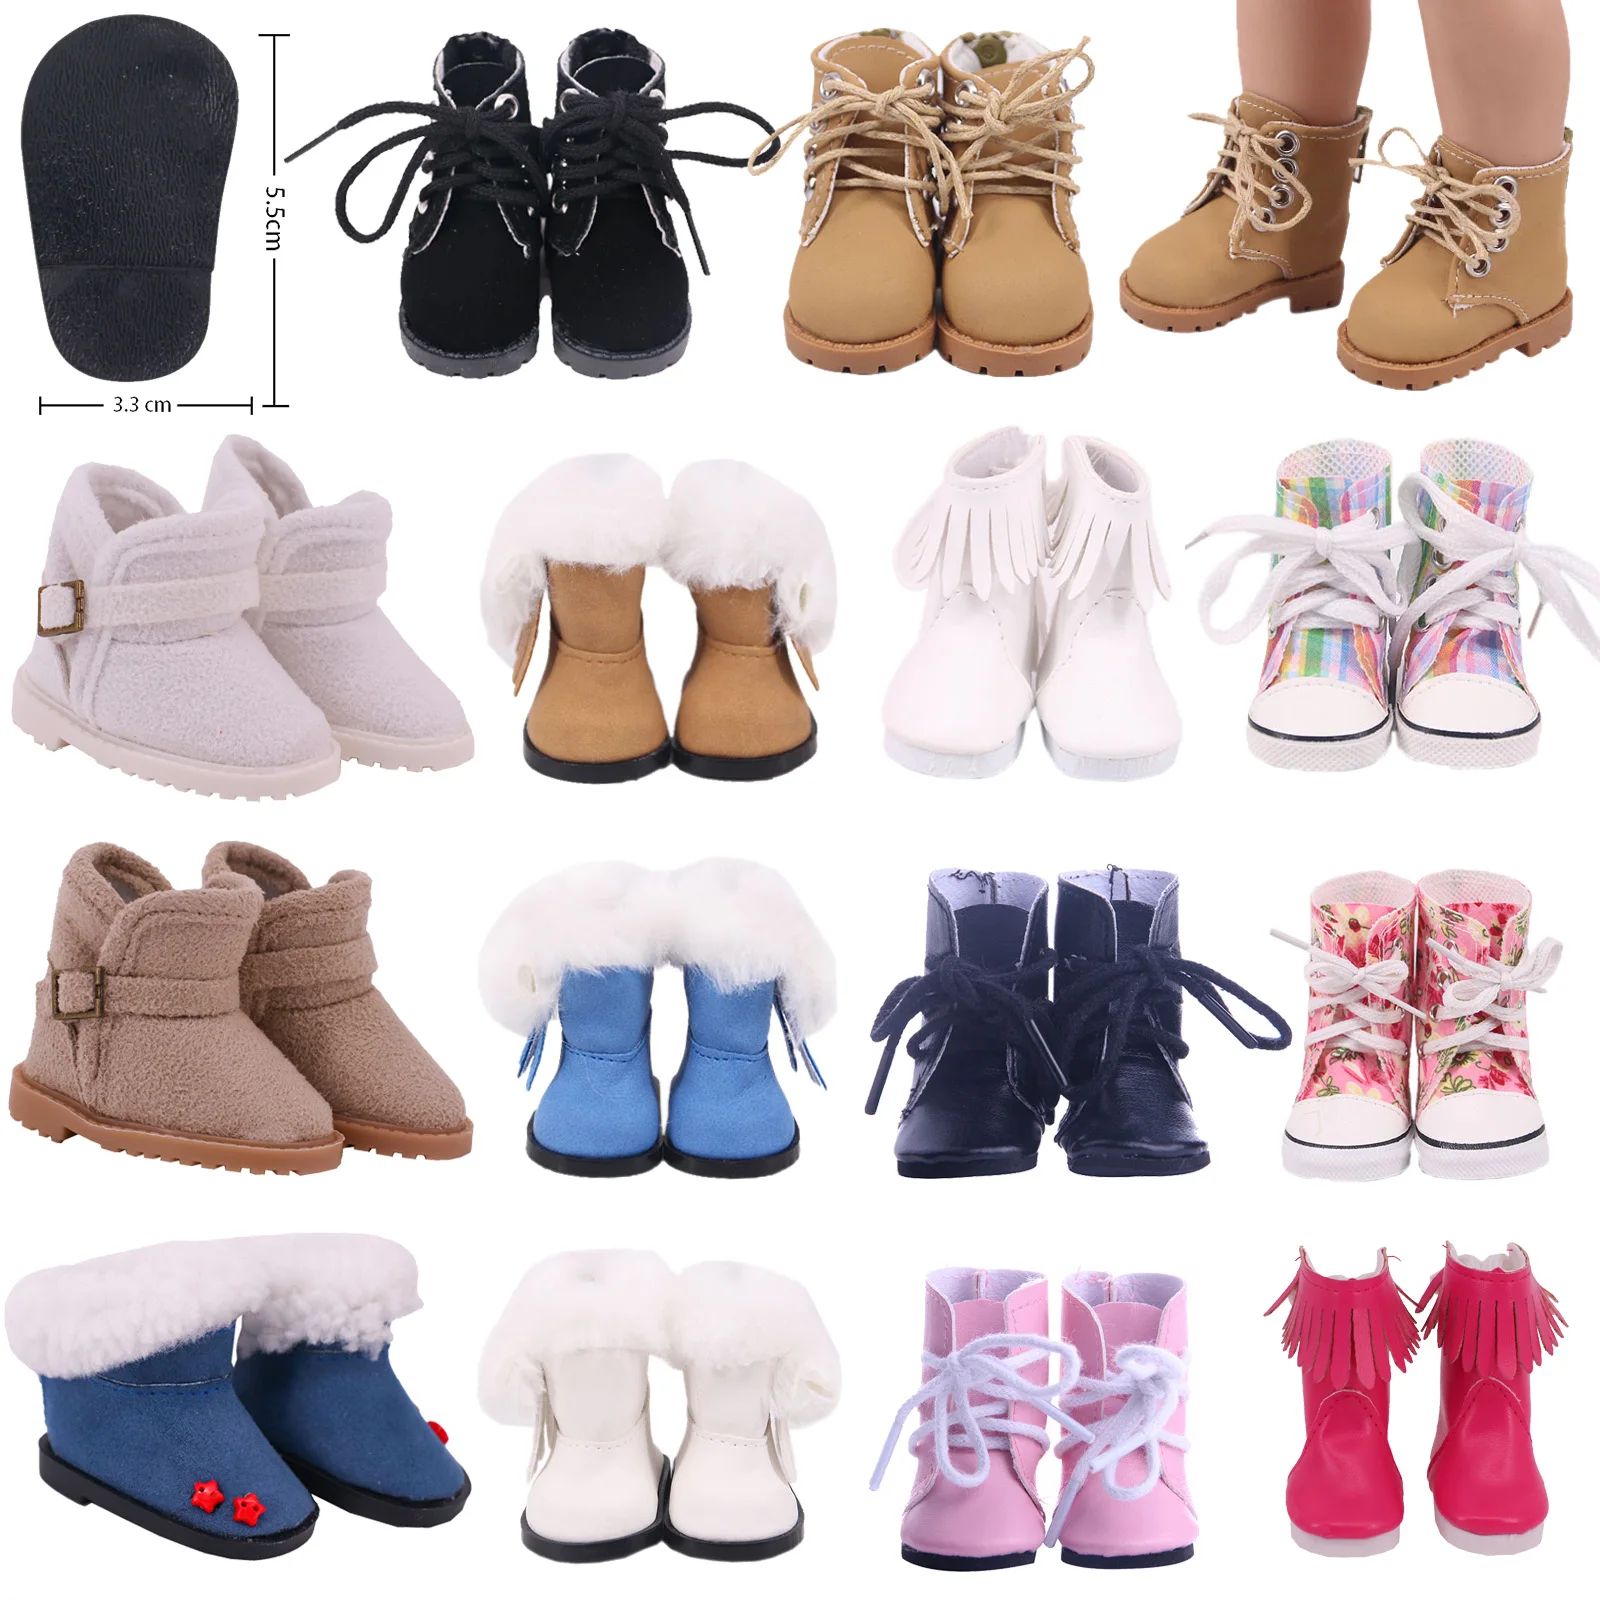 

5Cm Doll Shoes Boots High-top PU Shoes For 14.5 Inch American Paola Reina Doll&1/6 BJD Blythe EXO Doll Boots Generation Girl`s